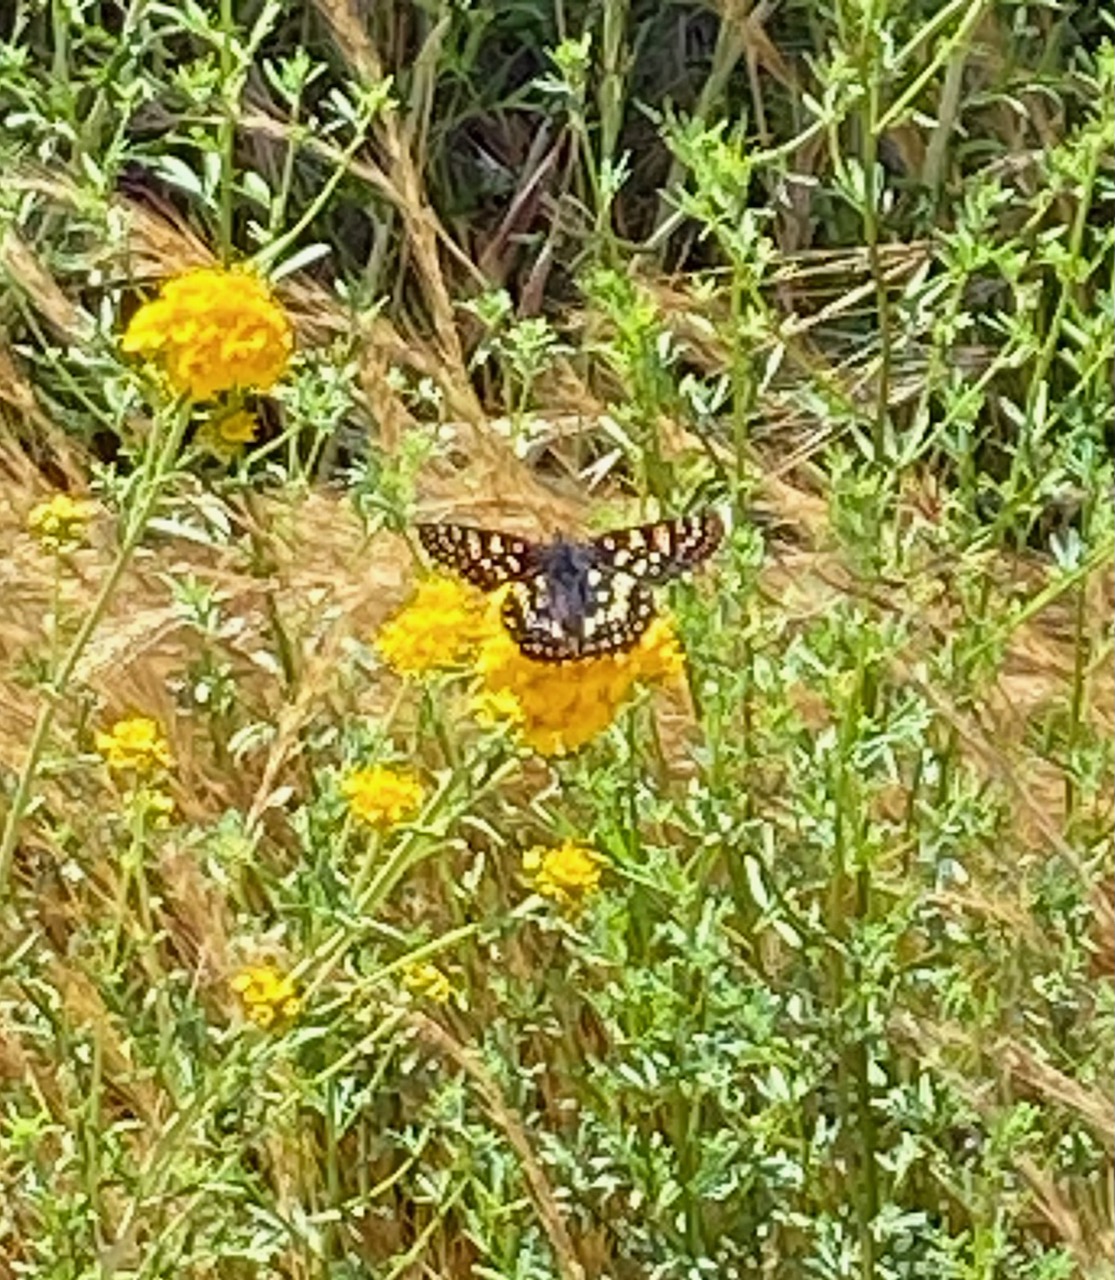 Variable checkerspot butterfly (Euphydryas chalcedona).